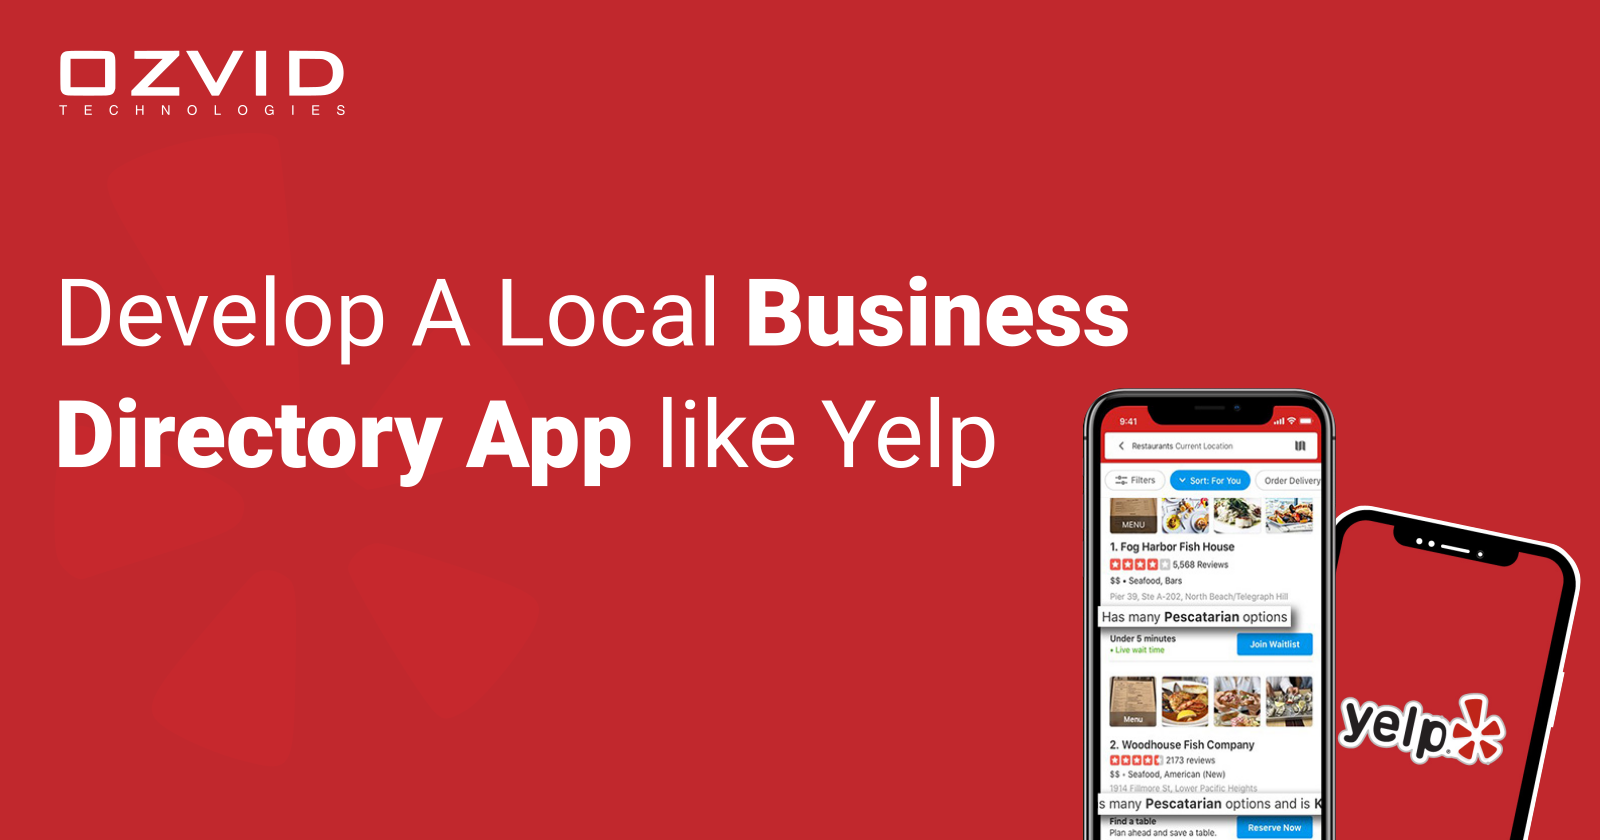 How Much Does It Cost to Develop a Business Directory App like Yelp?